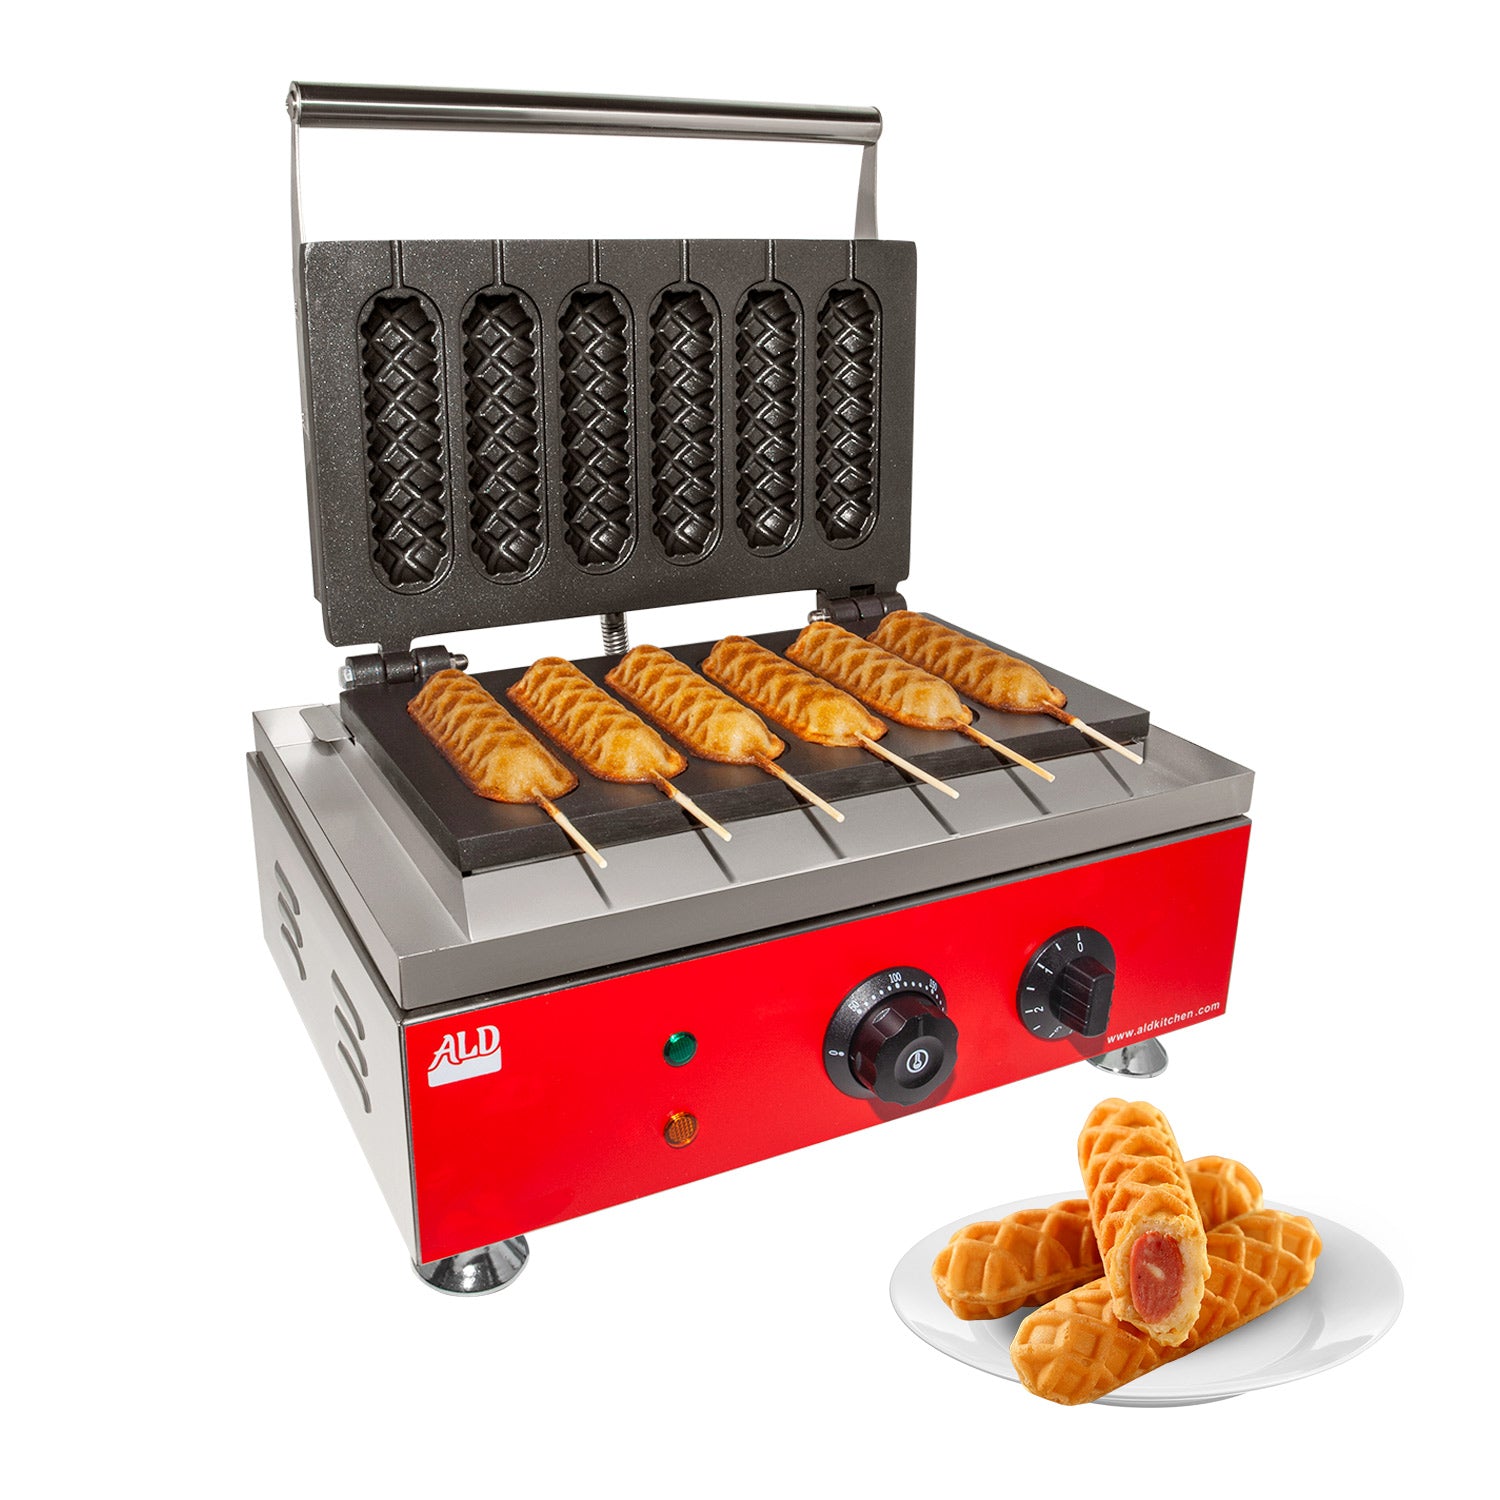 ALDKitchen Red Hot Dog Waffle Maker Corn Dogs Commercial Waffle Iron